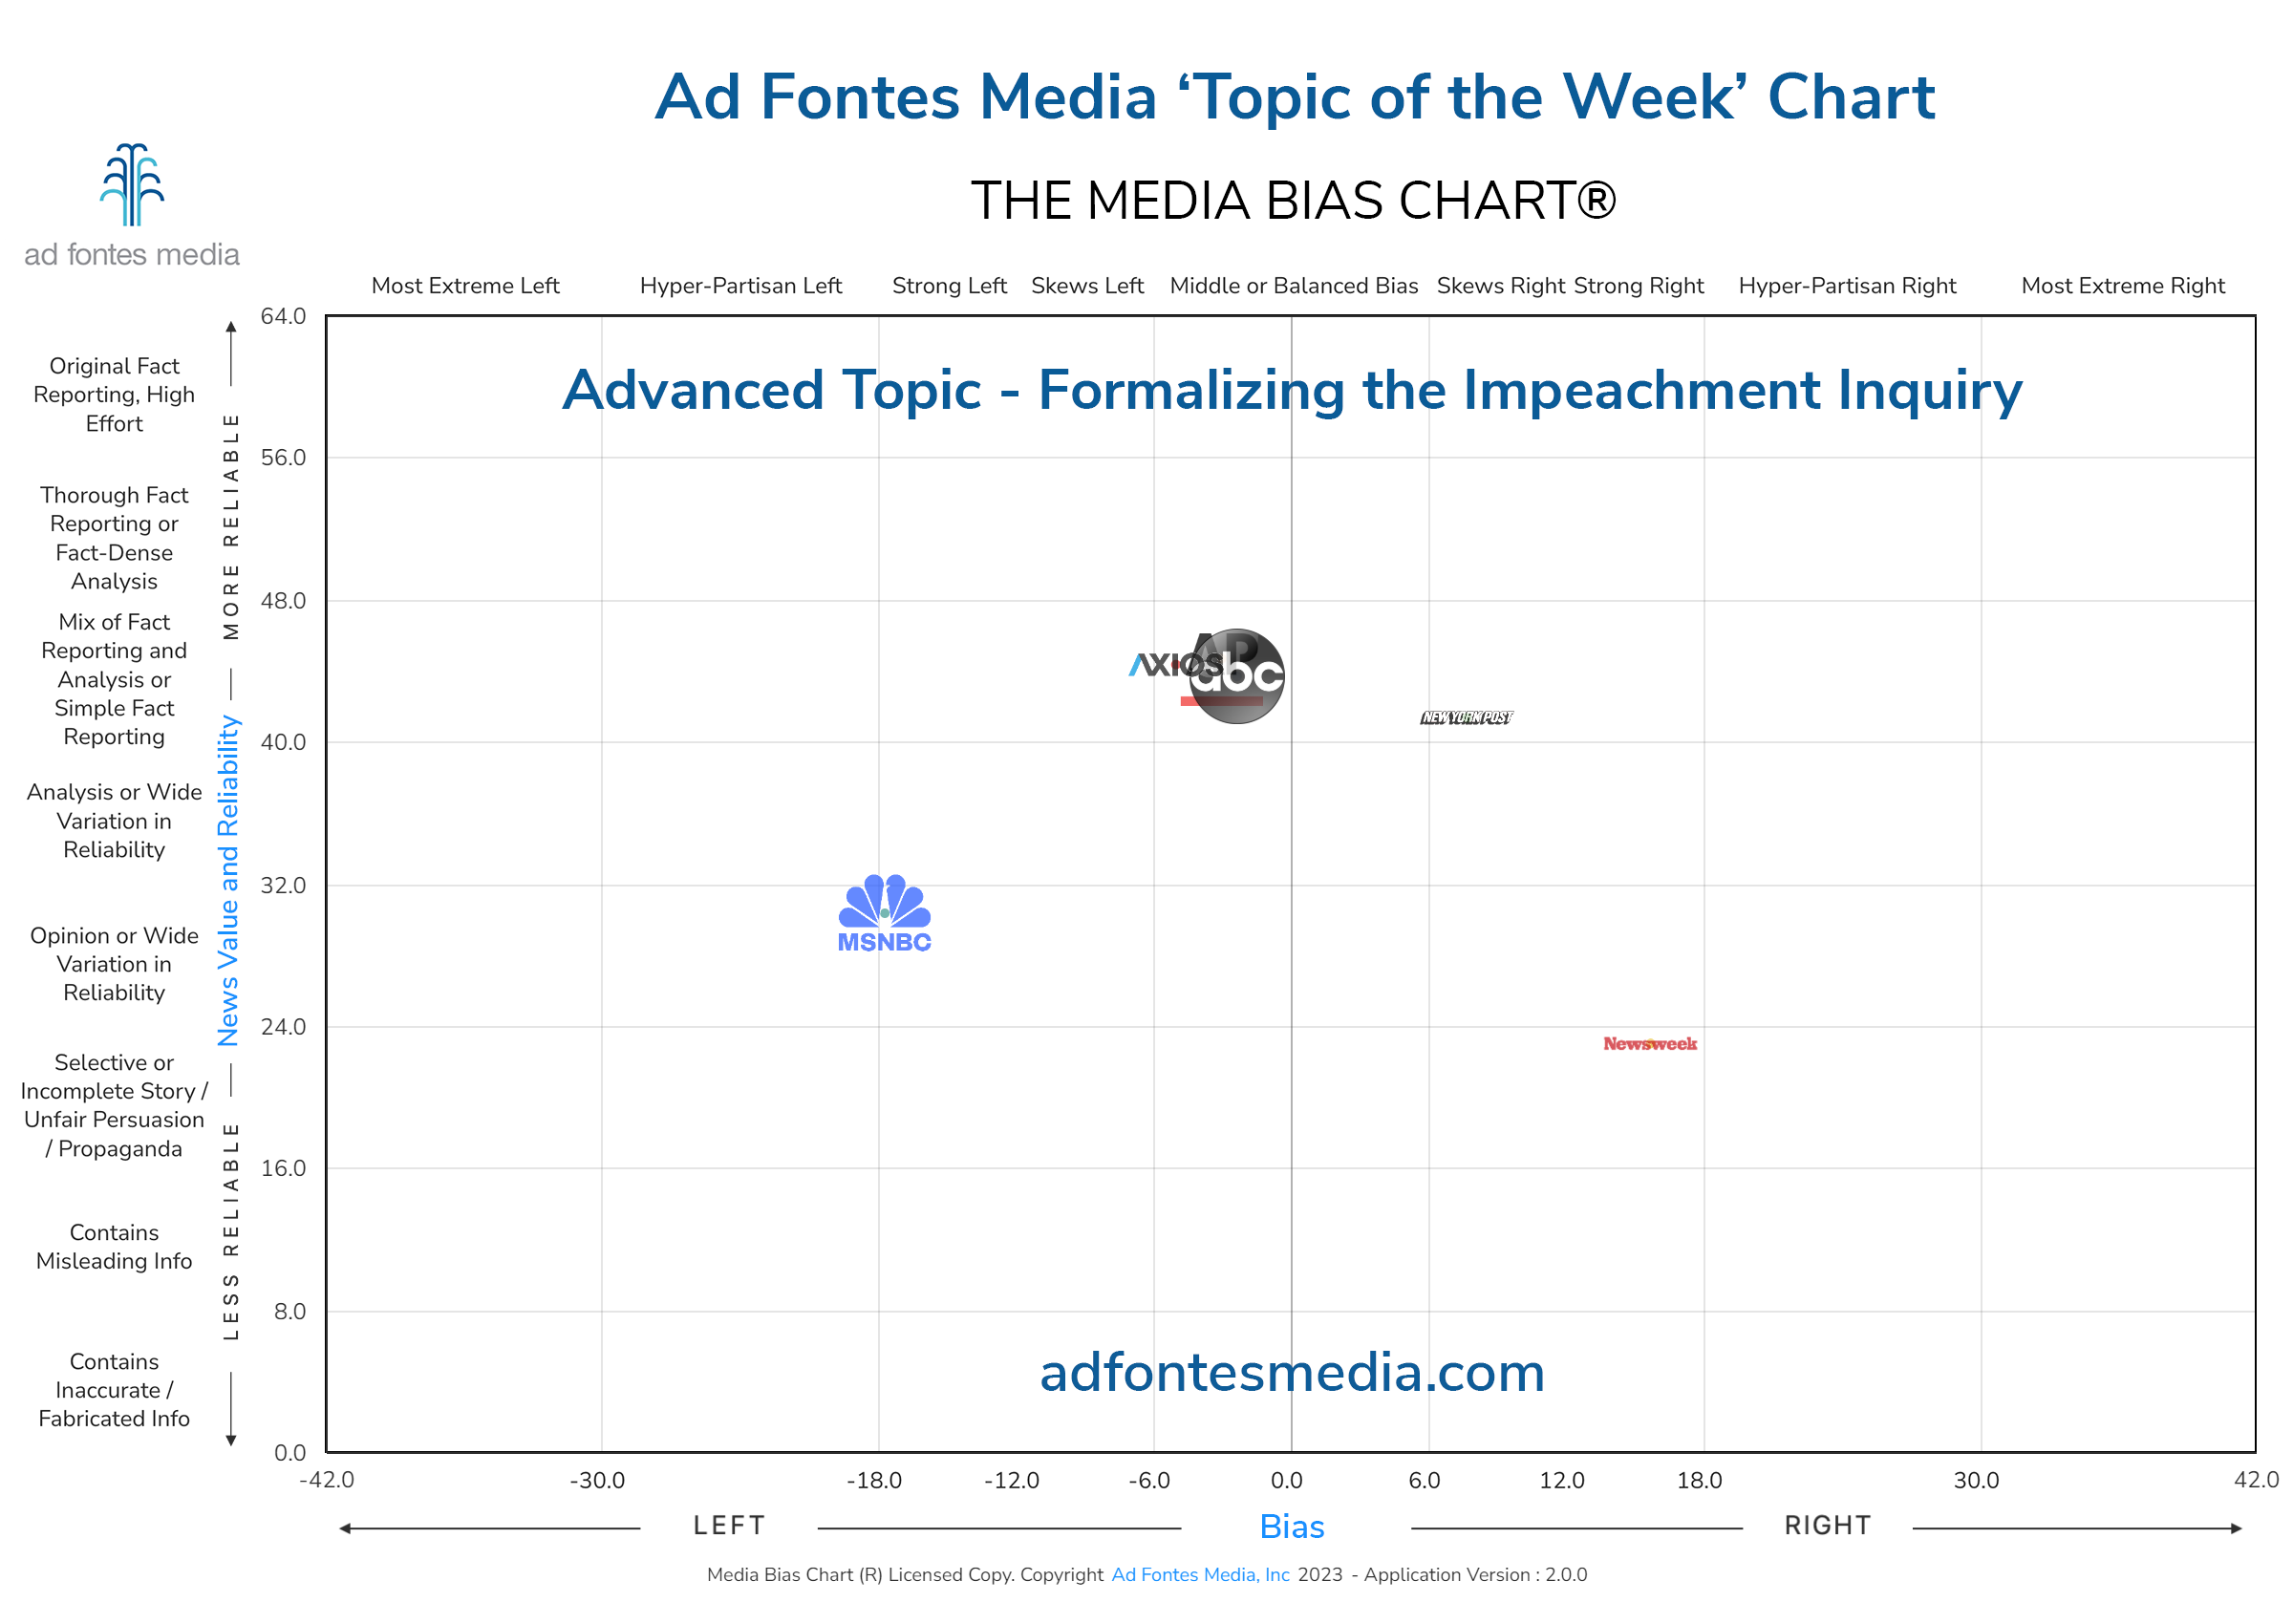 Media Bias Chart Examines Reactions to the House Formalizing the IMpeachment Inquiry